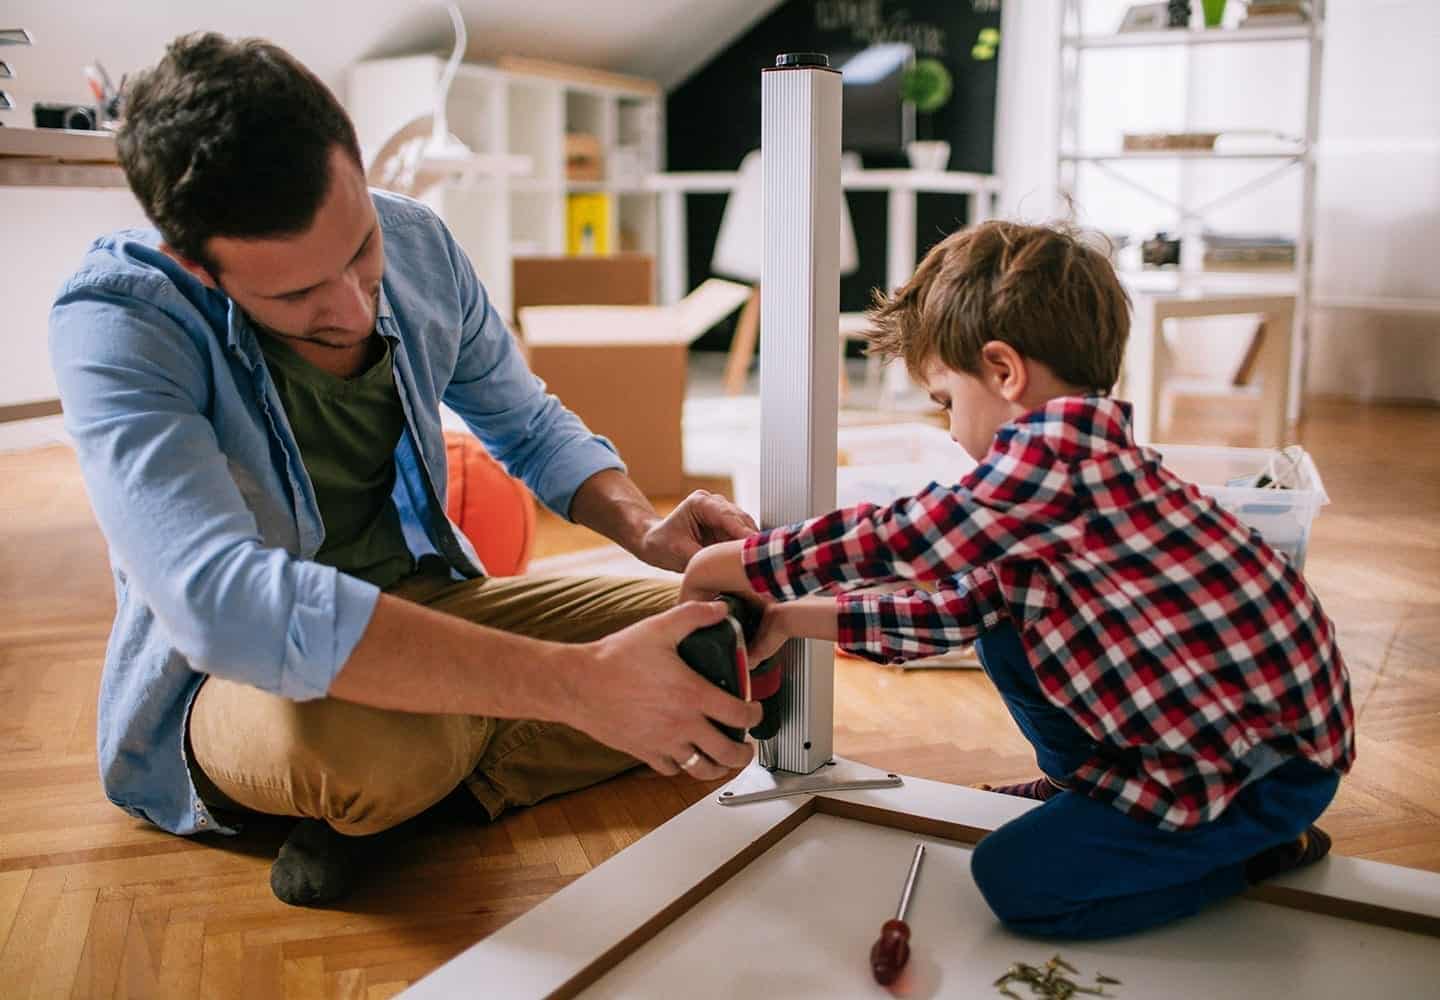 These Are 10 Home Improvement Projects You Should Hire Help For